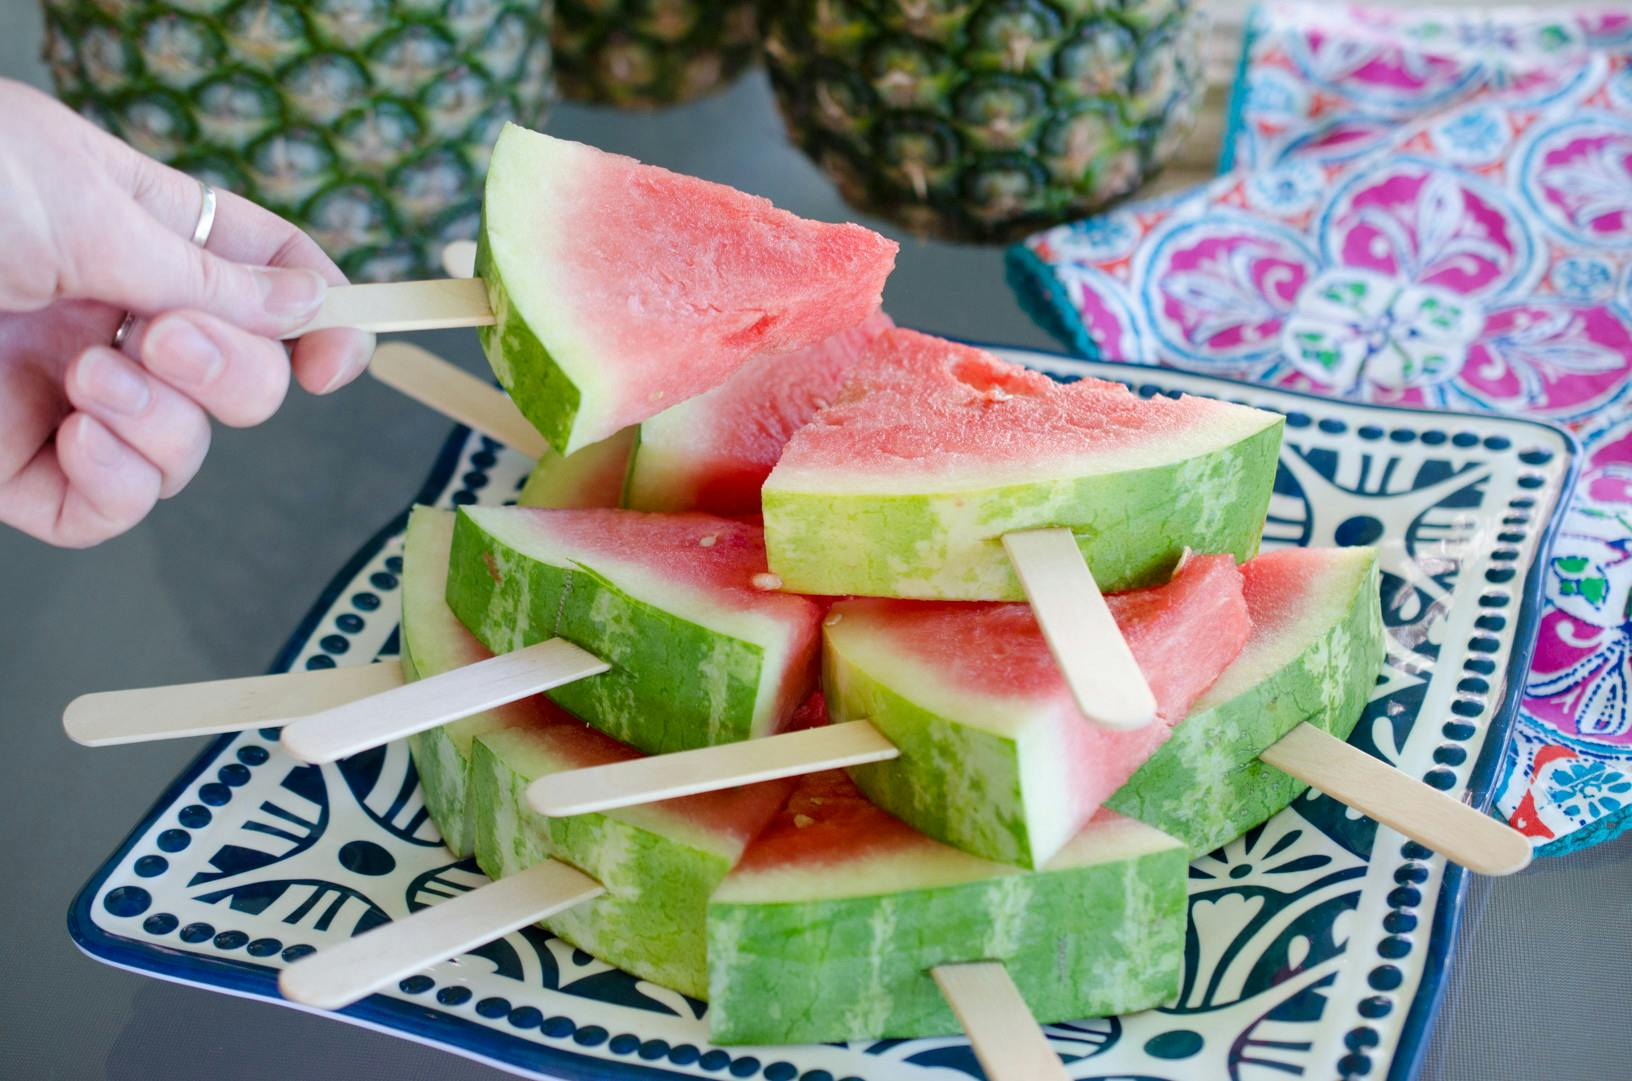 A person's hand taking a slice of watermelon on a popsicle stick from a plate of them.